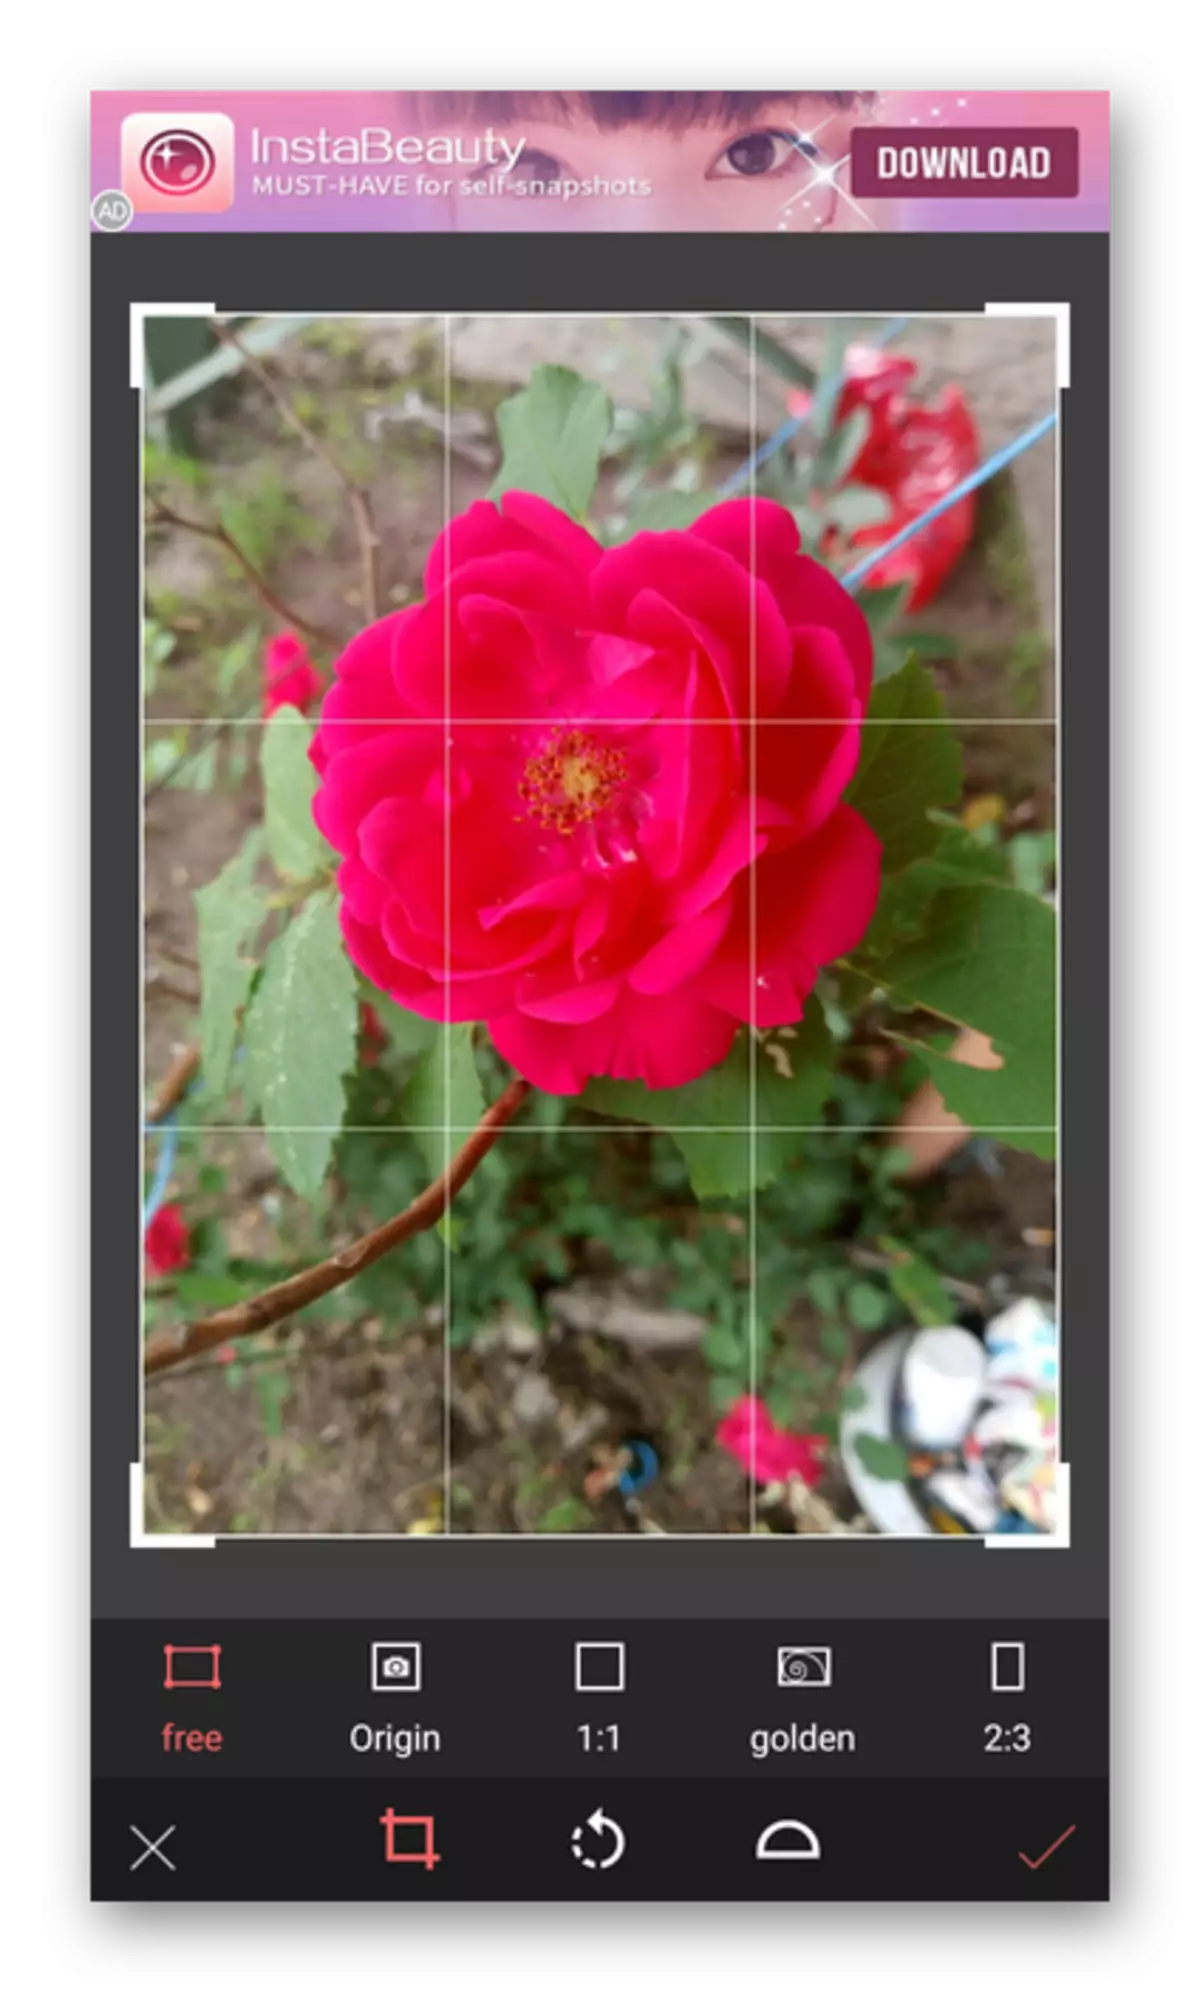 Image cropping in the Selfie application